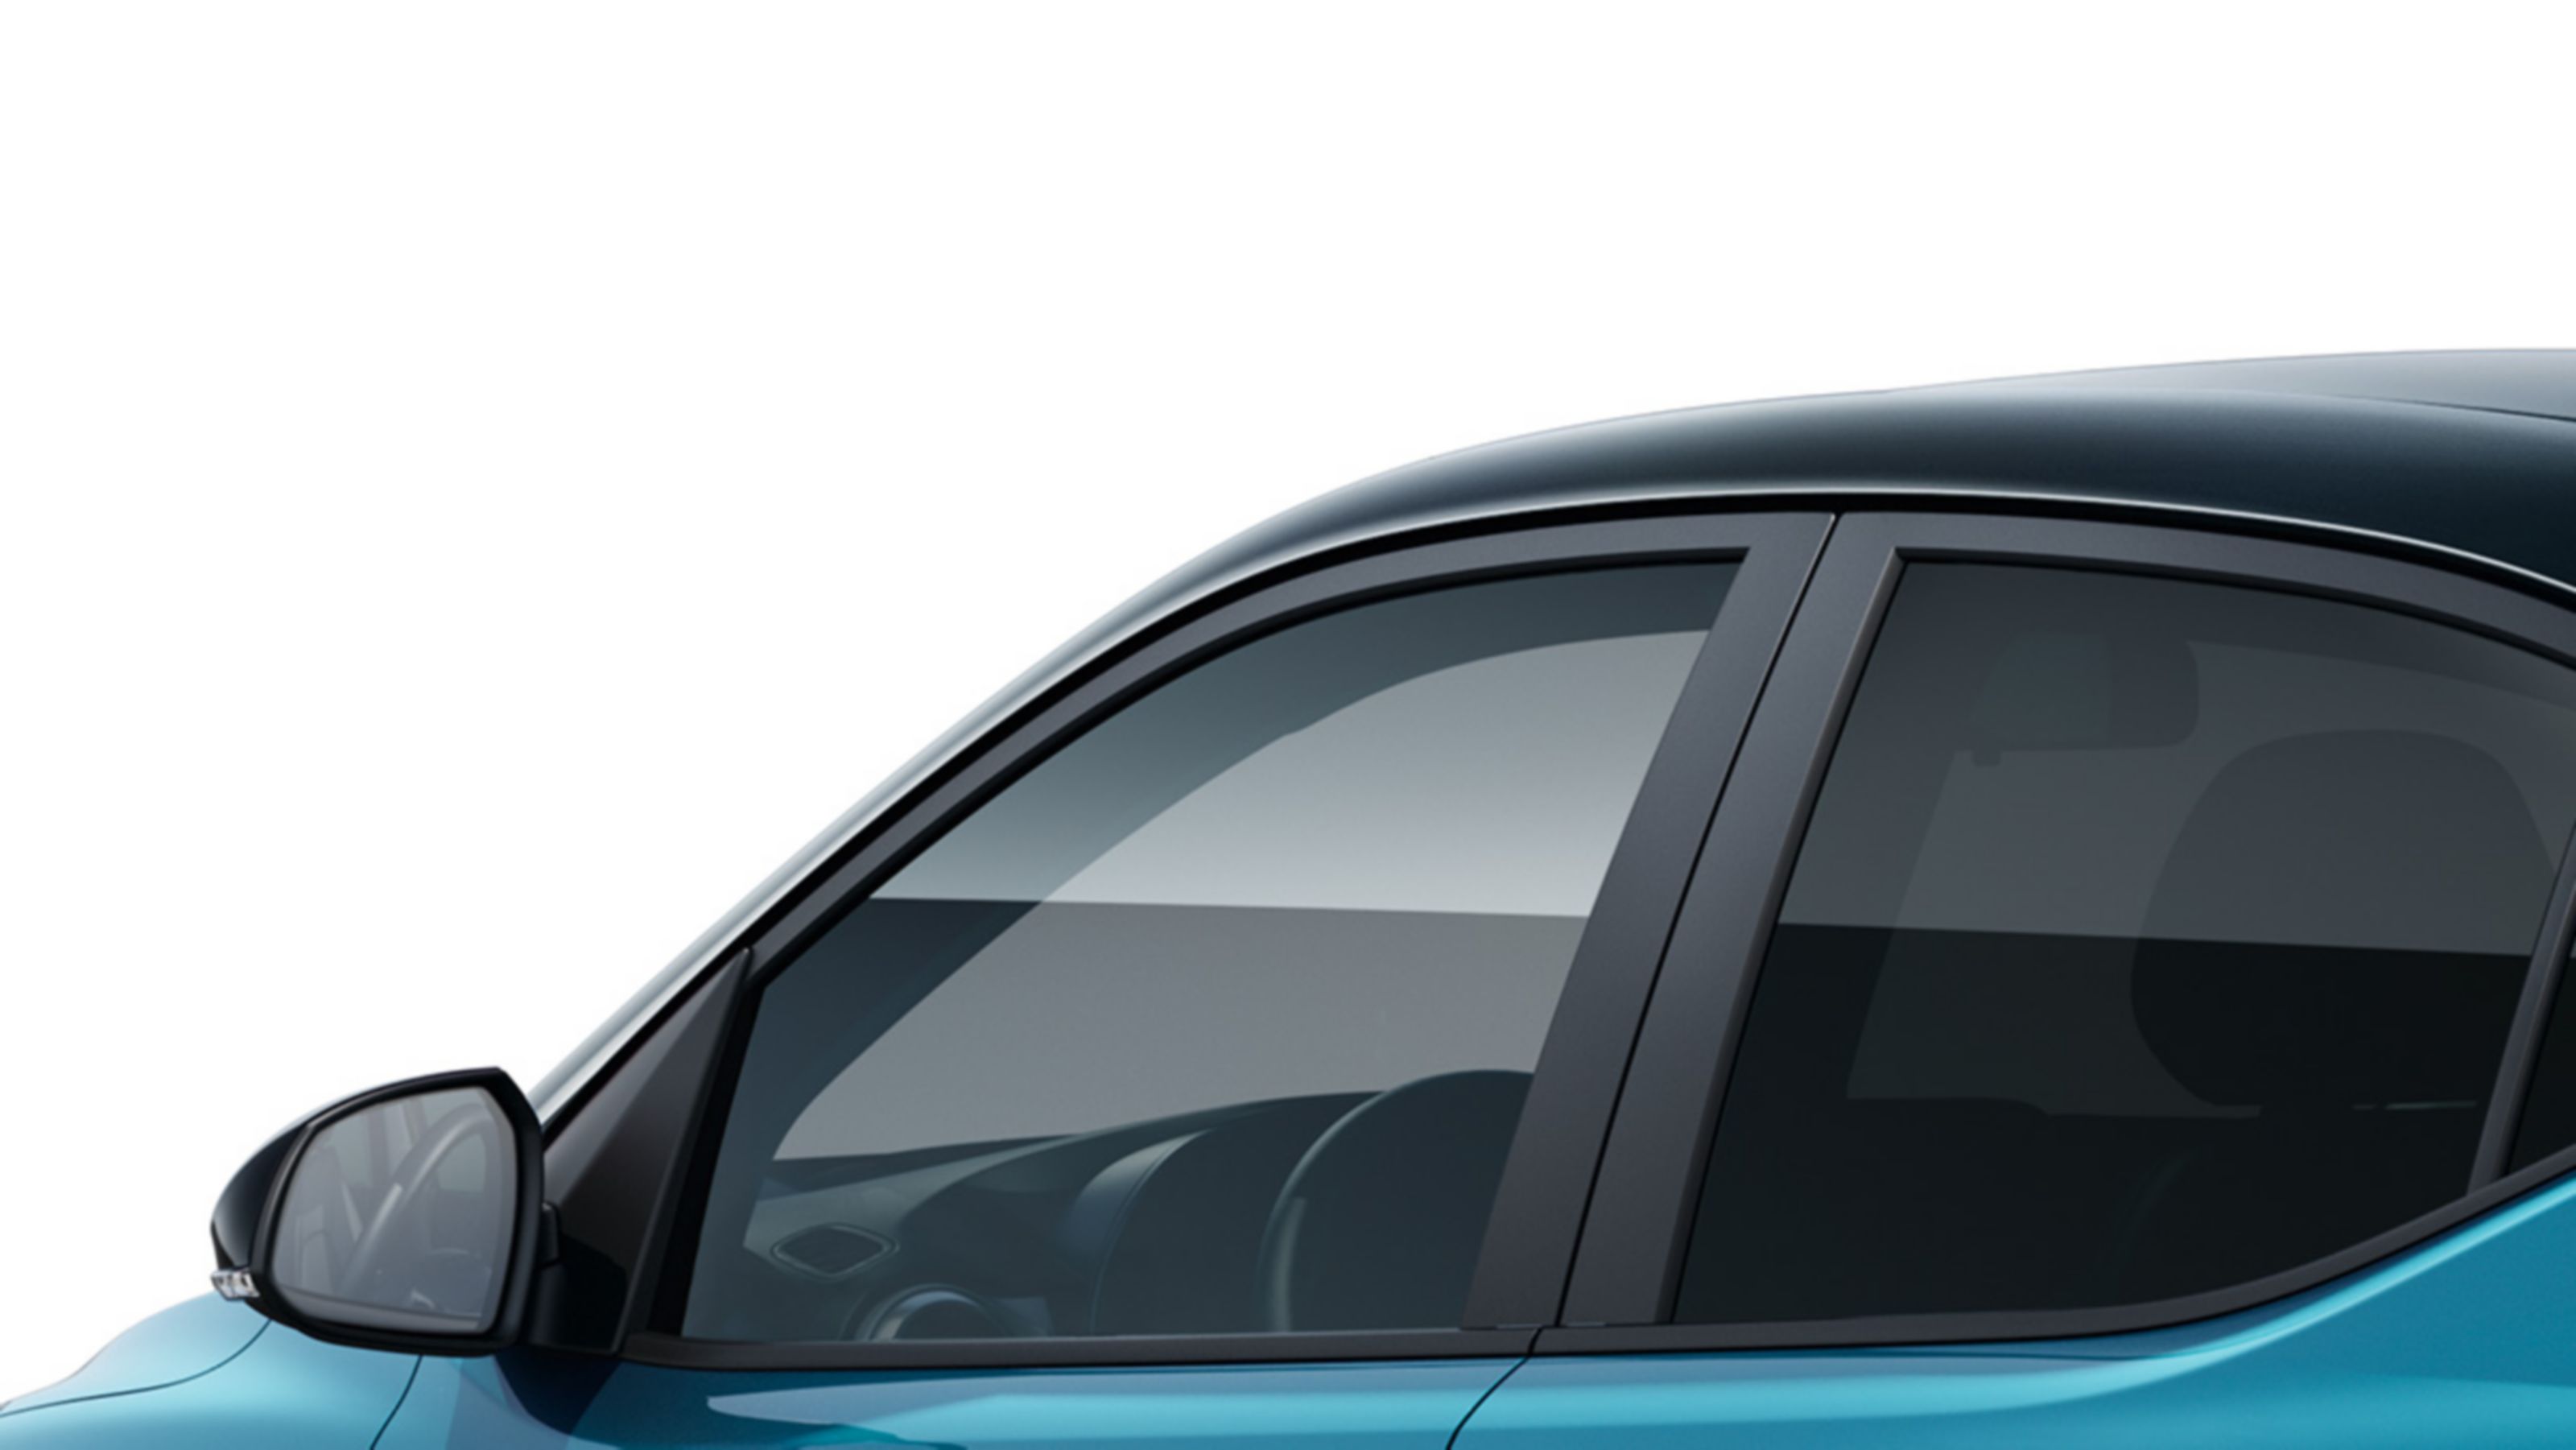 Keep the heat out and stay private with the tinted rear windows of the Hyundai i10.